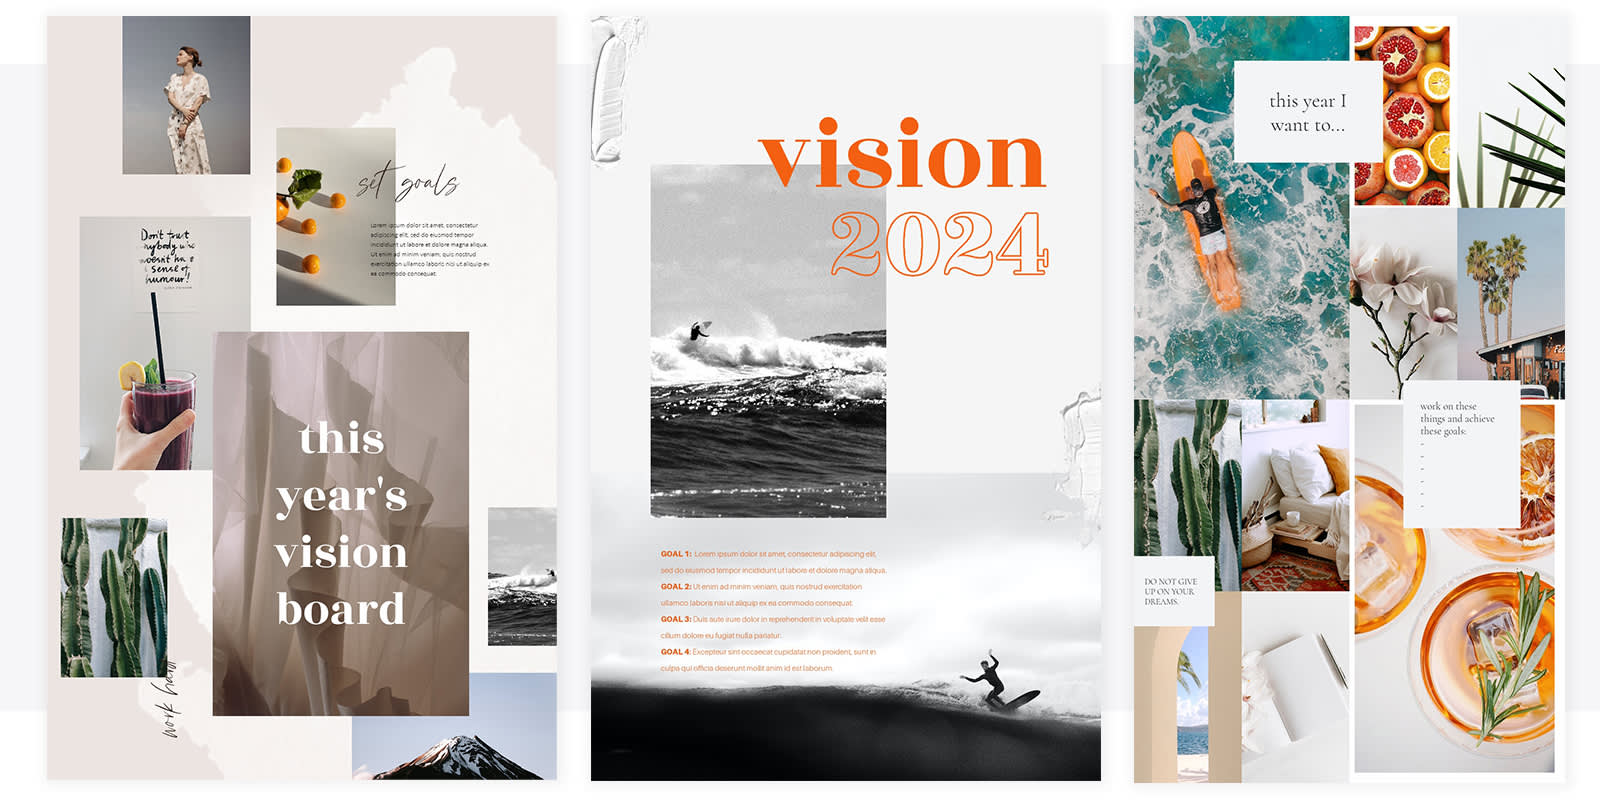 For 2021 - How to build a perfect vision board / goal board to